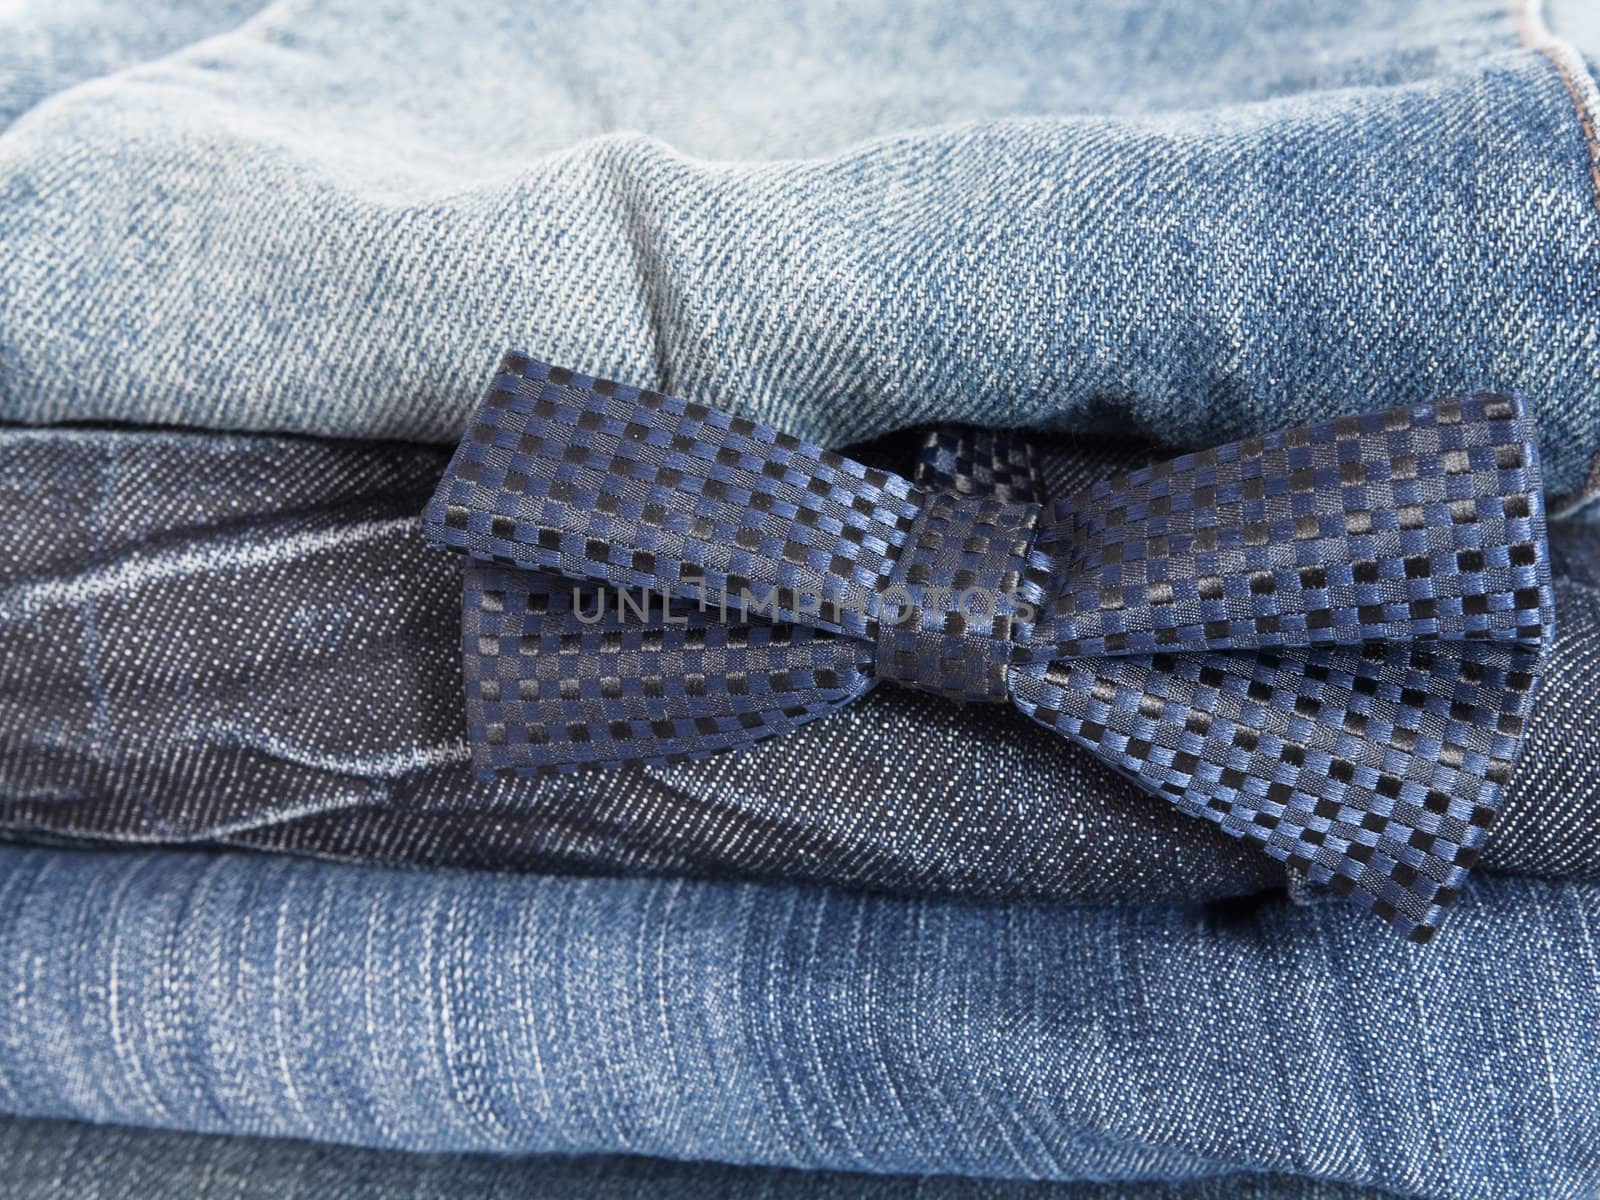 heap of jeans and decorative tie as a fashion background by Serp